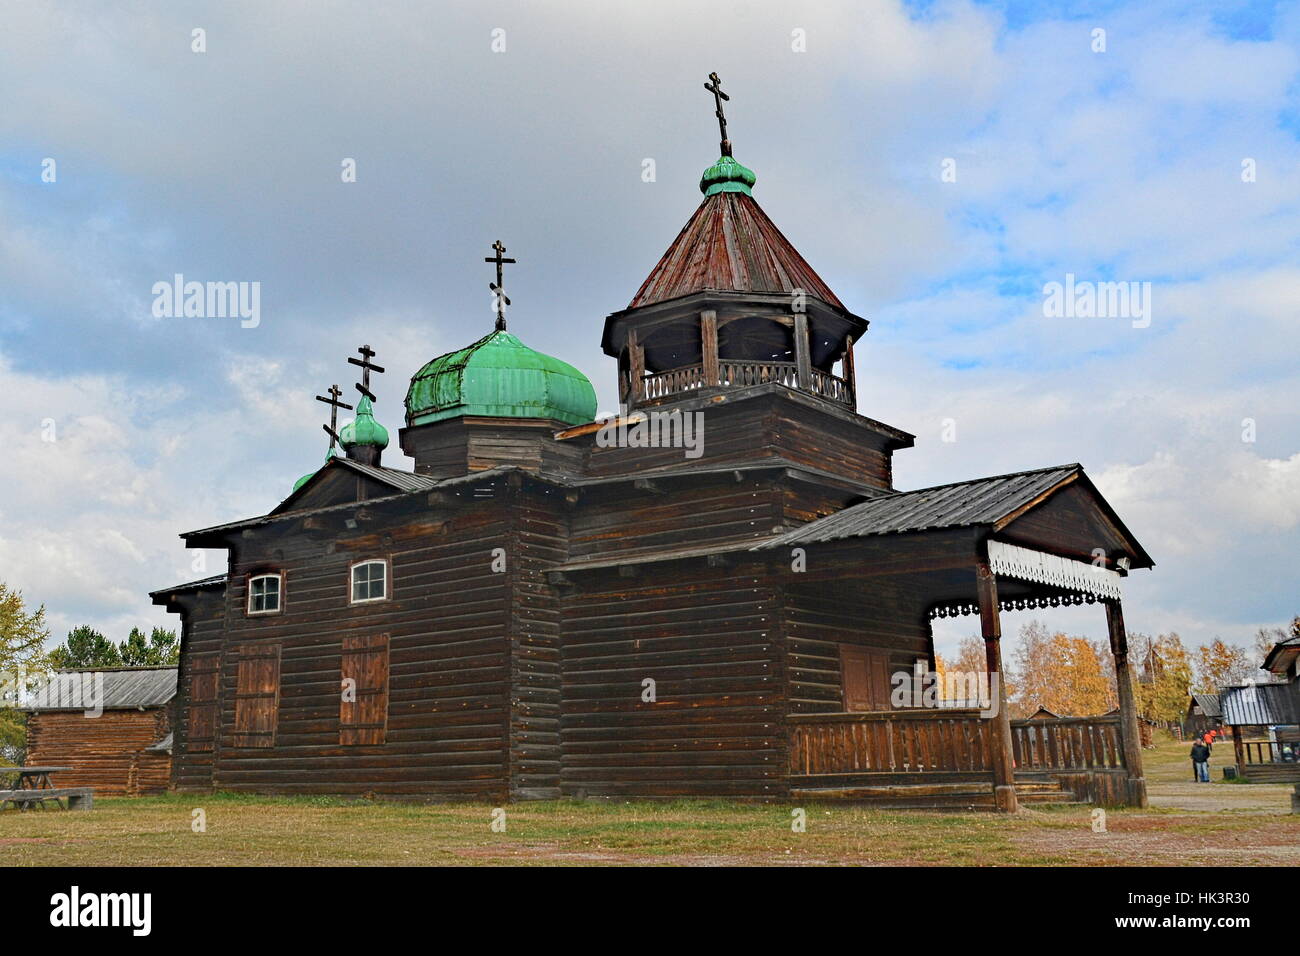 Taltsy Museum of Wooden Architectural and Ethnography Stock Photo